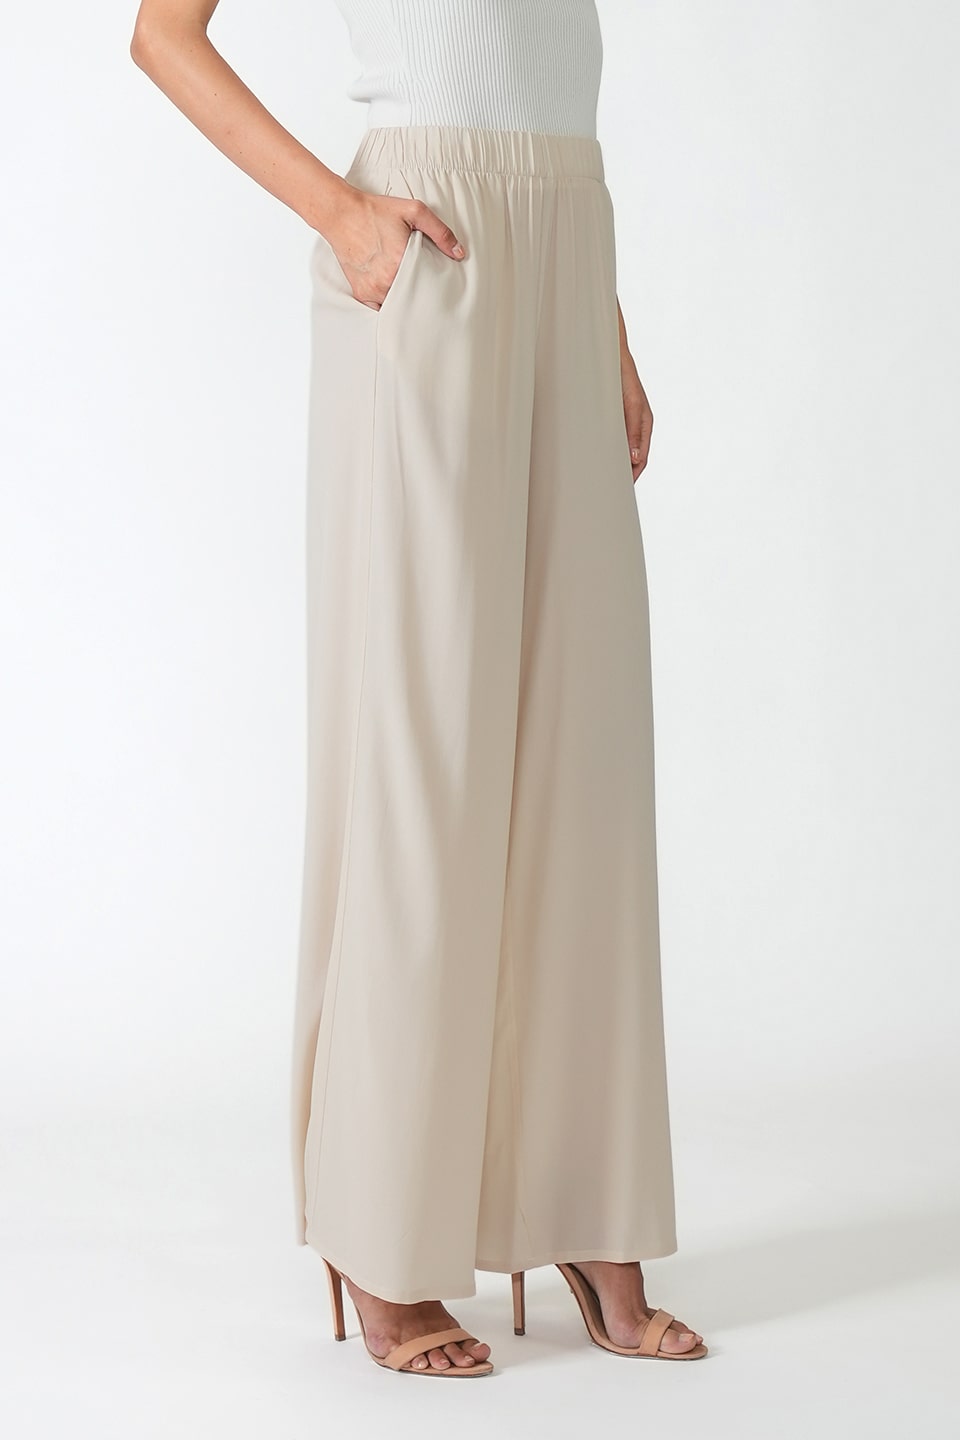 Designer Ivory Women pants, shop online with free delivery in UAE. Product gallery 4